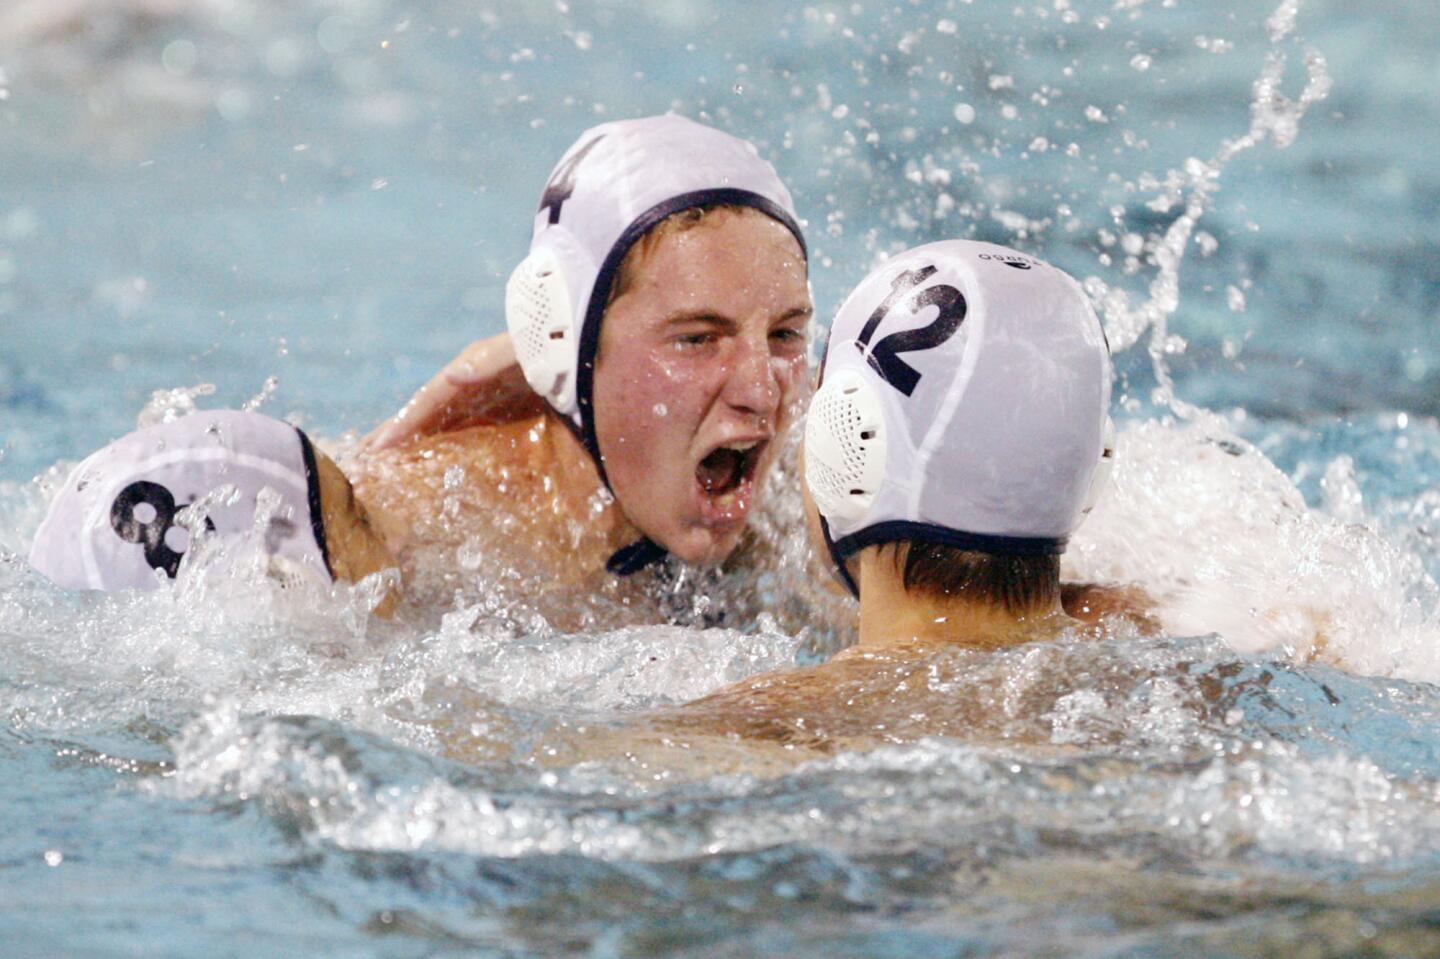 Pasadena Poly's Ryan Schiller, center, rejoices with his teammates after winning the CIF Southern Section Division V championship match against Glendale, which took place at William Woollett Jr. Aquatic Center in Irvine on Saturday, November 17, 2012.